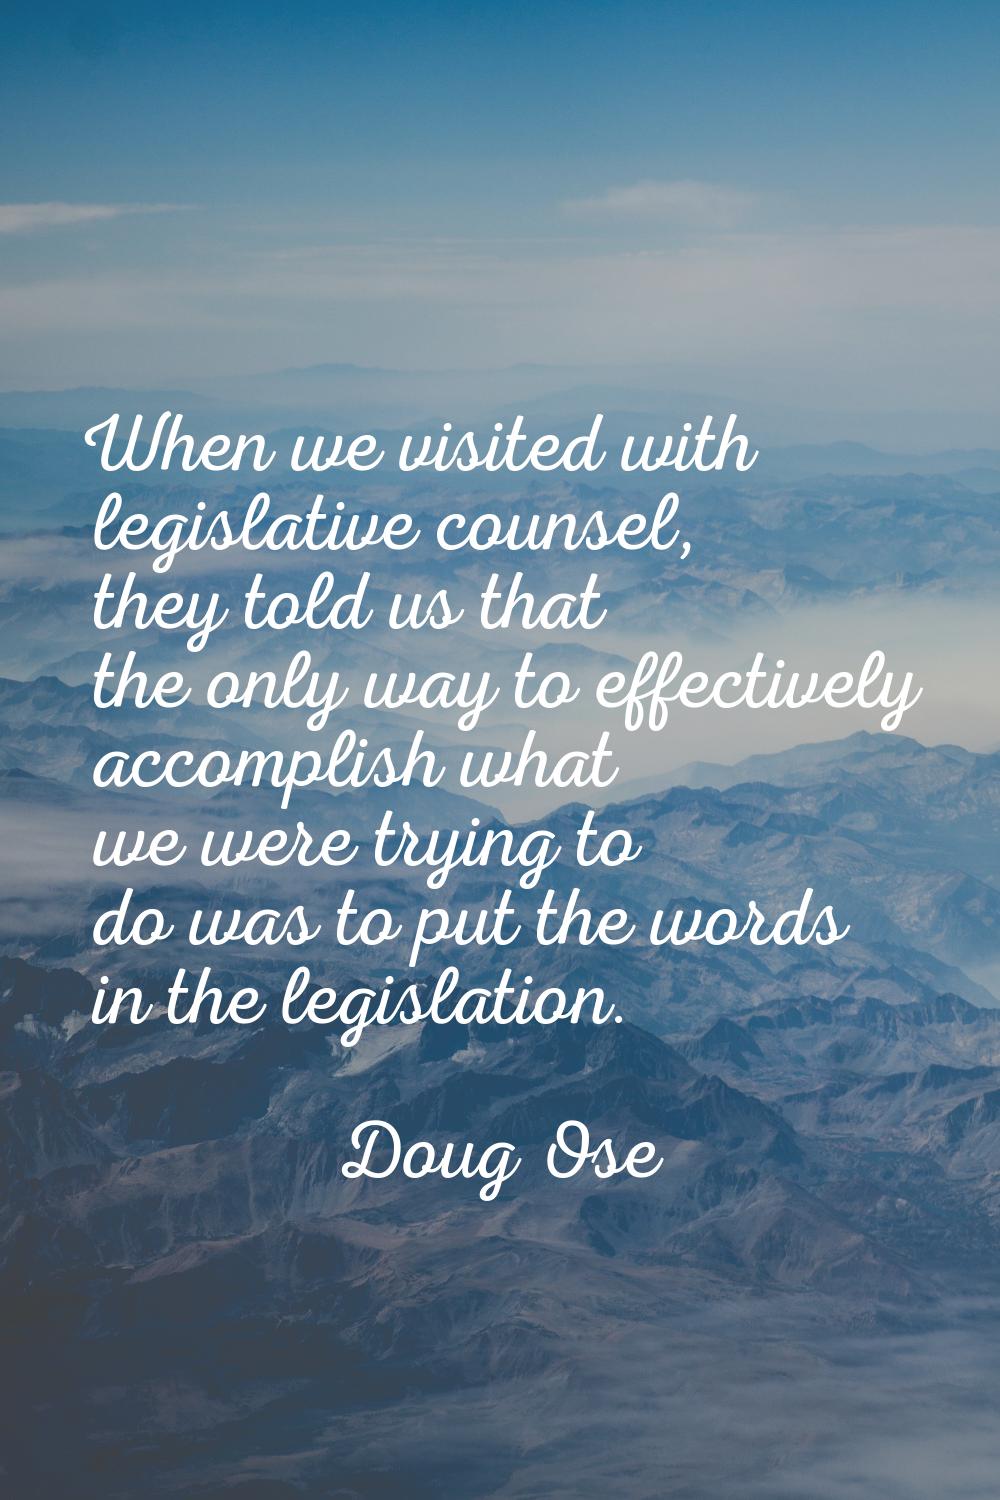 When we visited with legislative counsel, they told us that the only way to effectively accomplish 